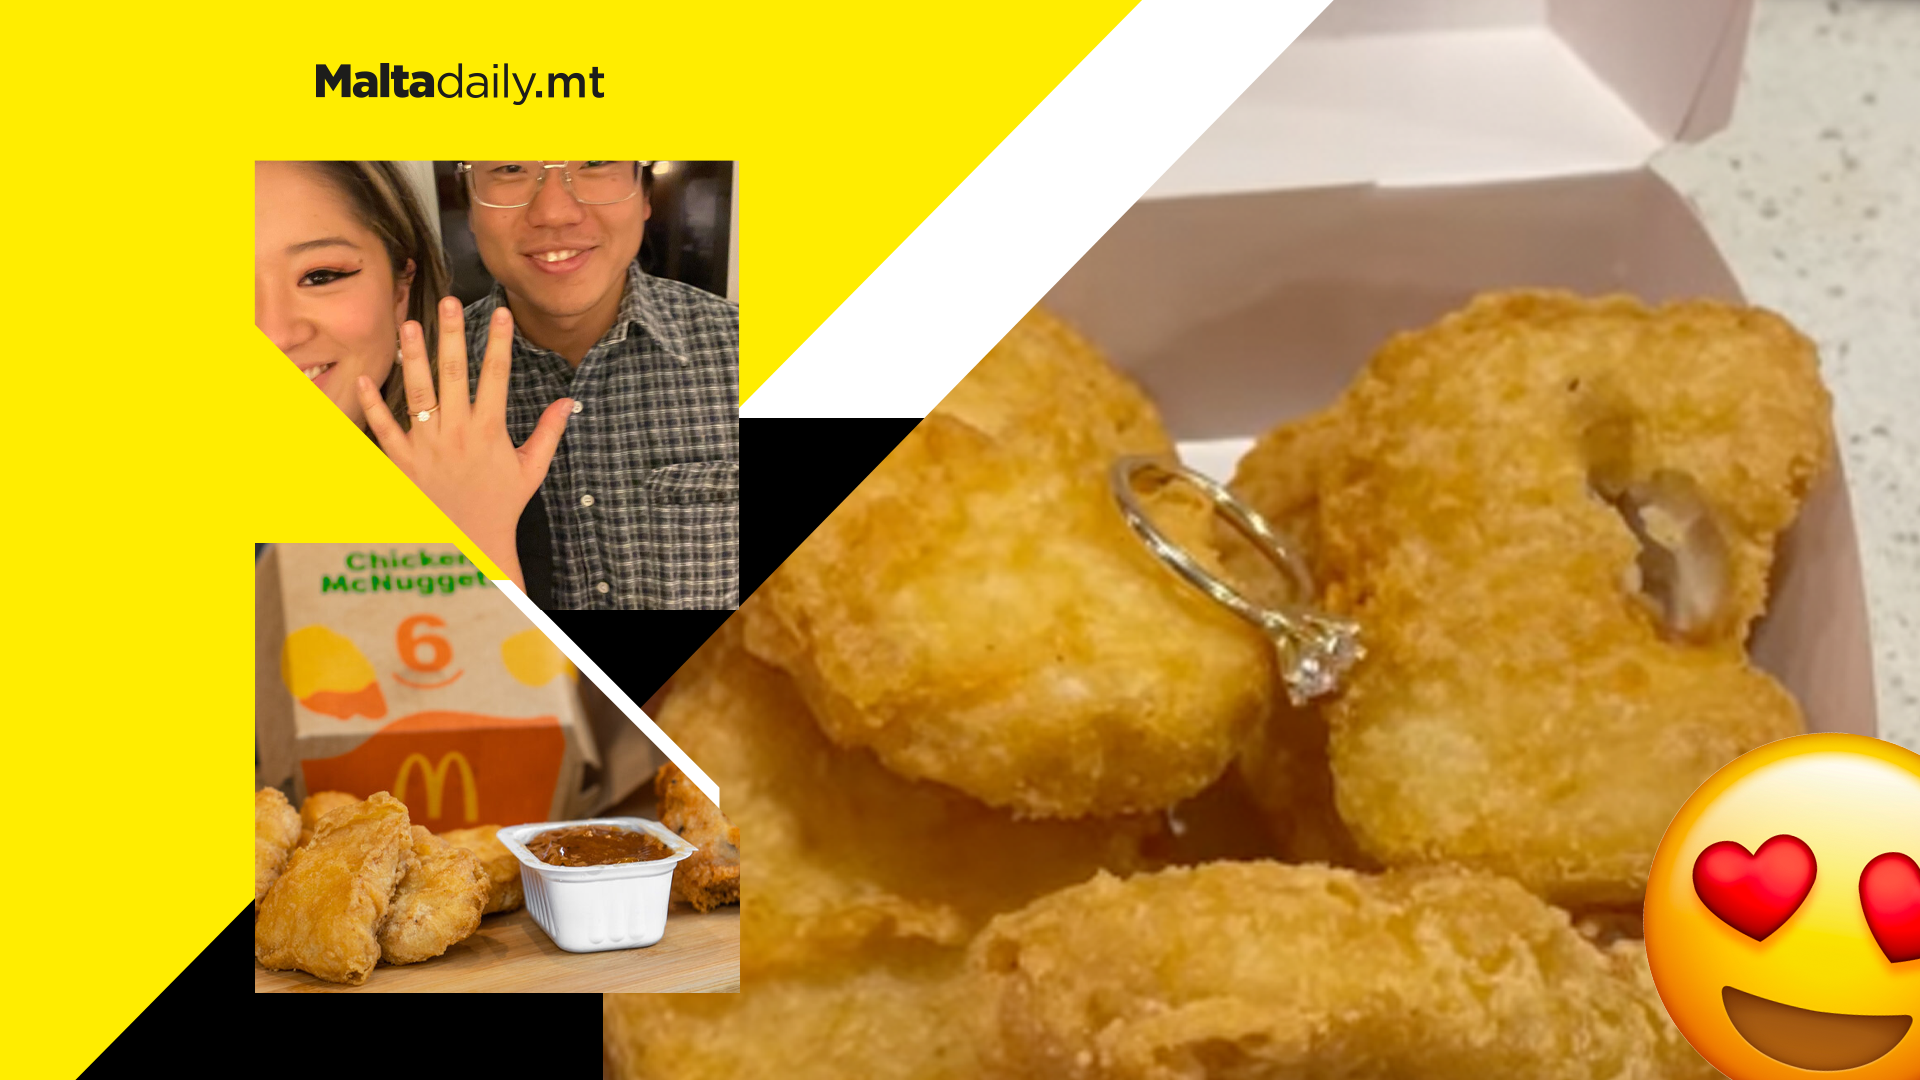 Man proposes to his girlfriend with a packet of Chicken McNuggets